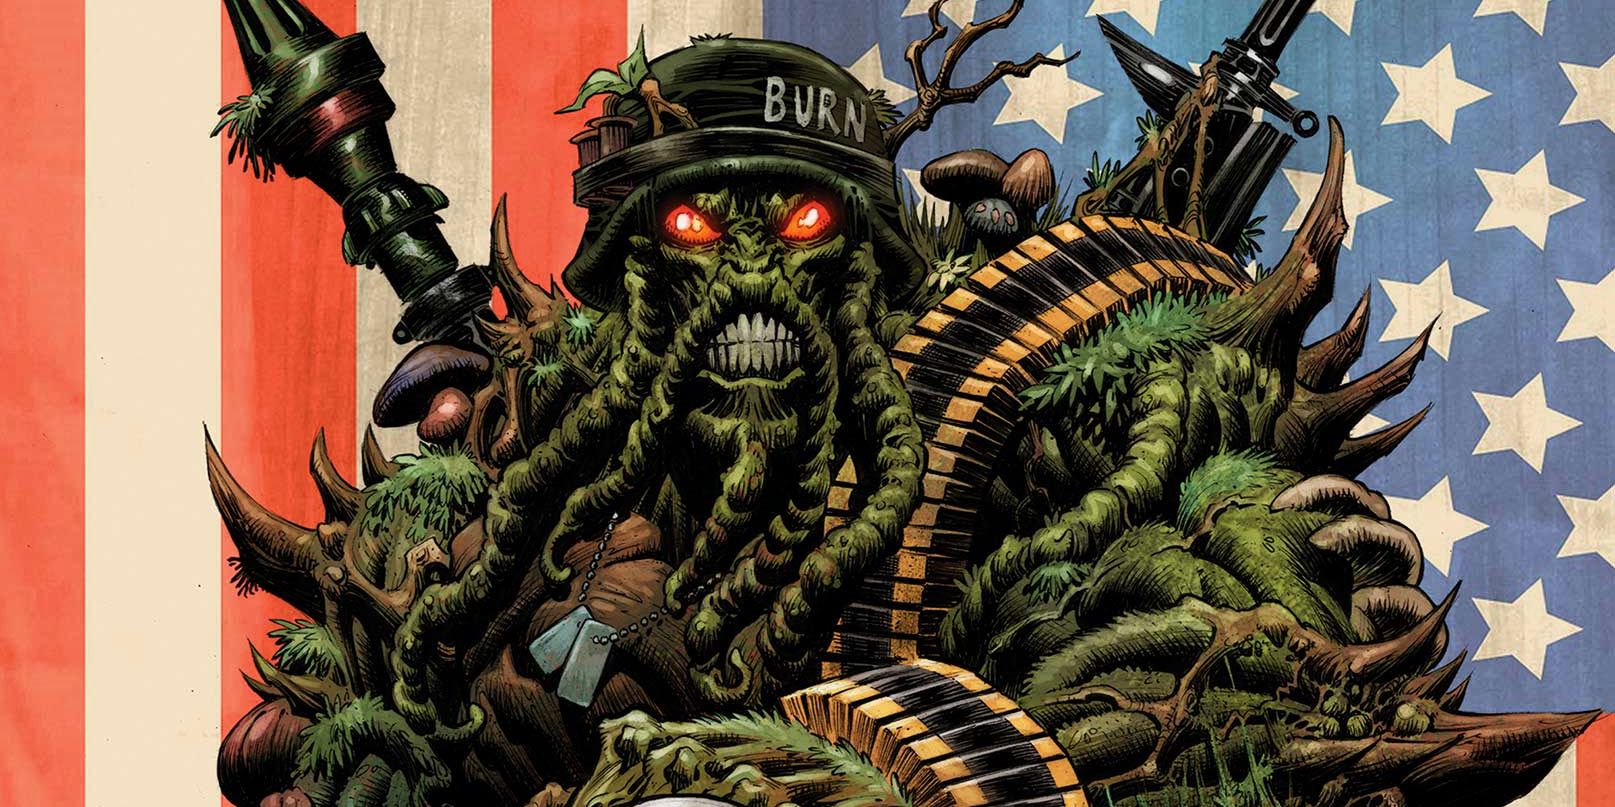 With Marvel's New Super-Soldier, Who Needs Swamp Thing?